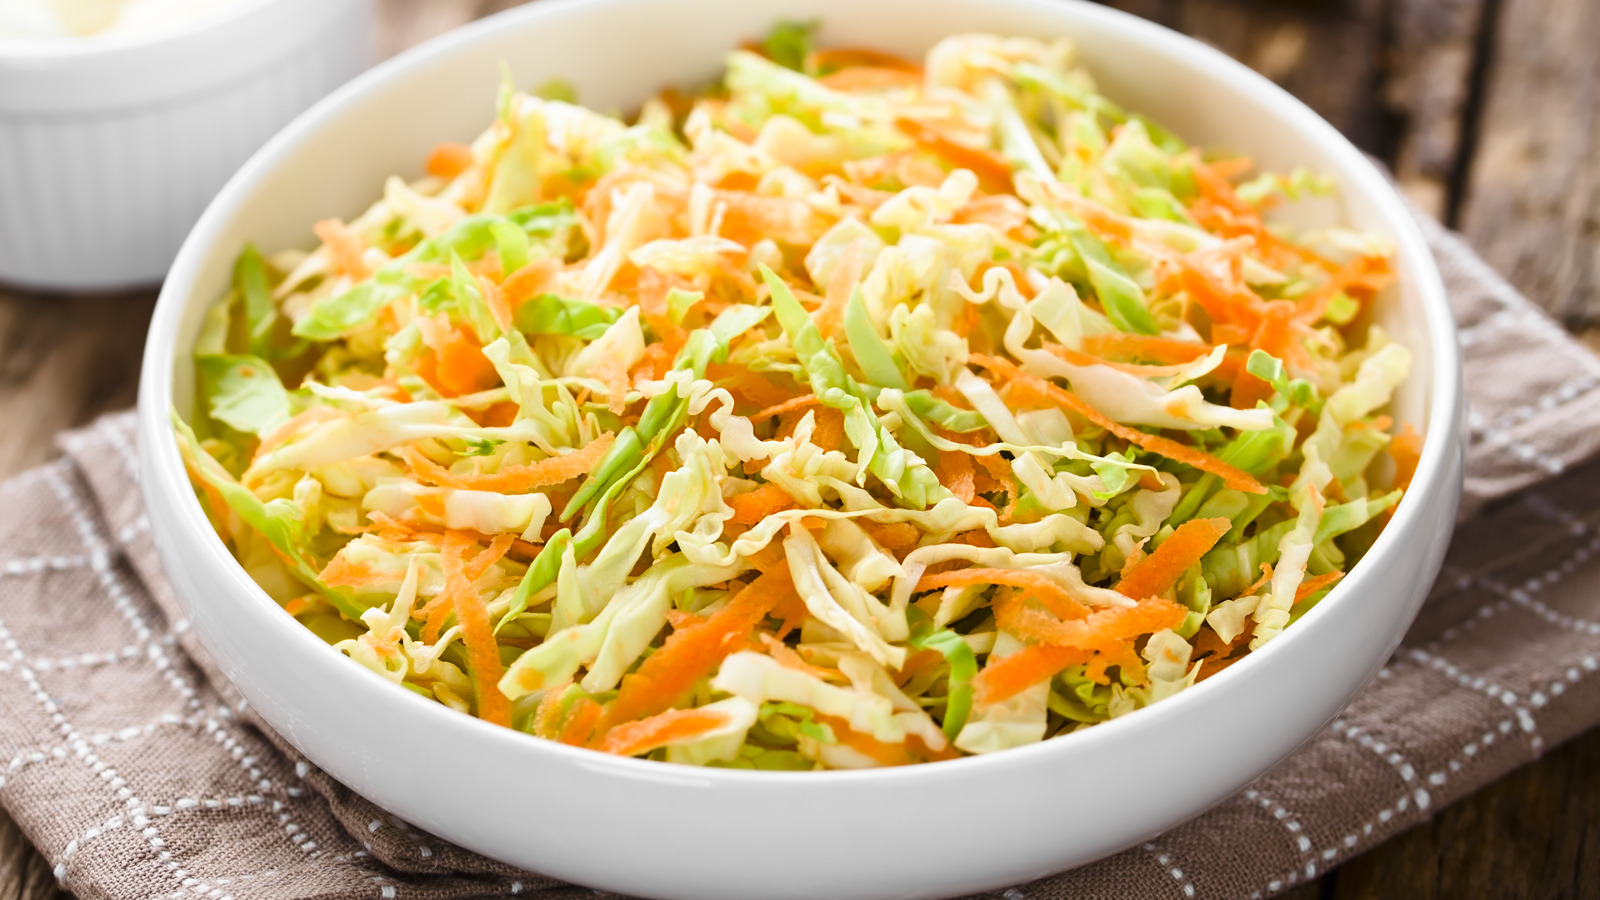 Everything You Need to Know About Trader Joe’s Crunchy Slaw Salad